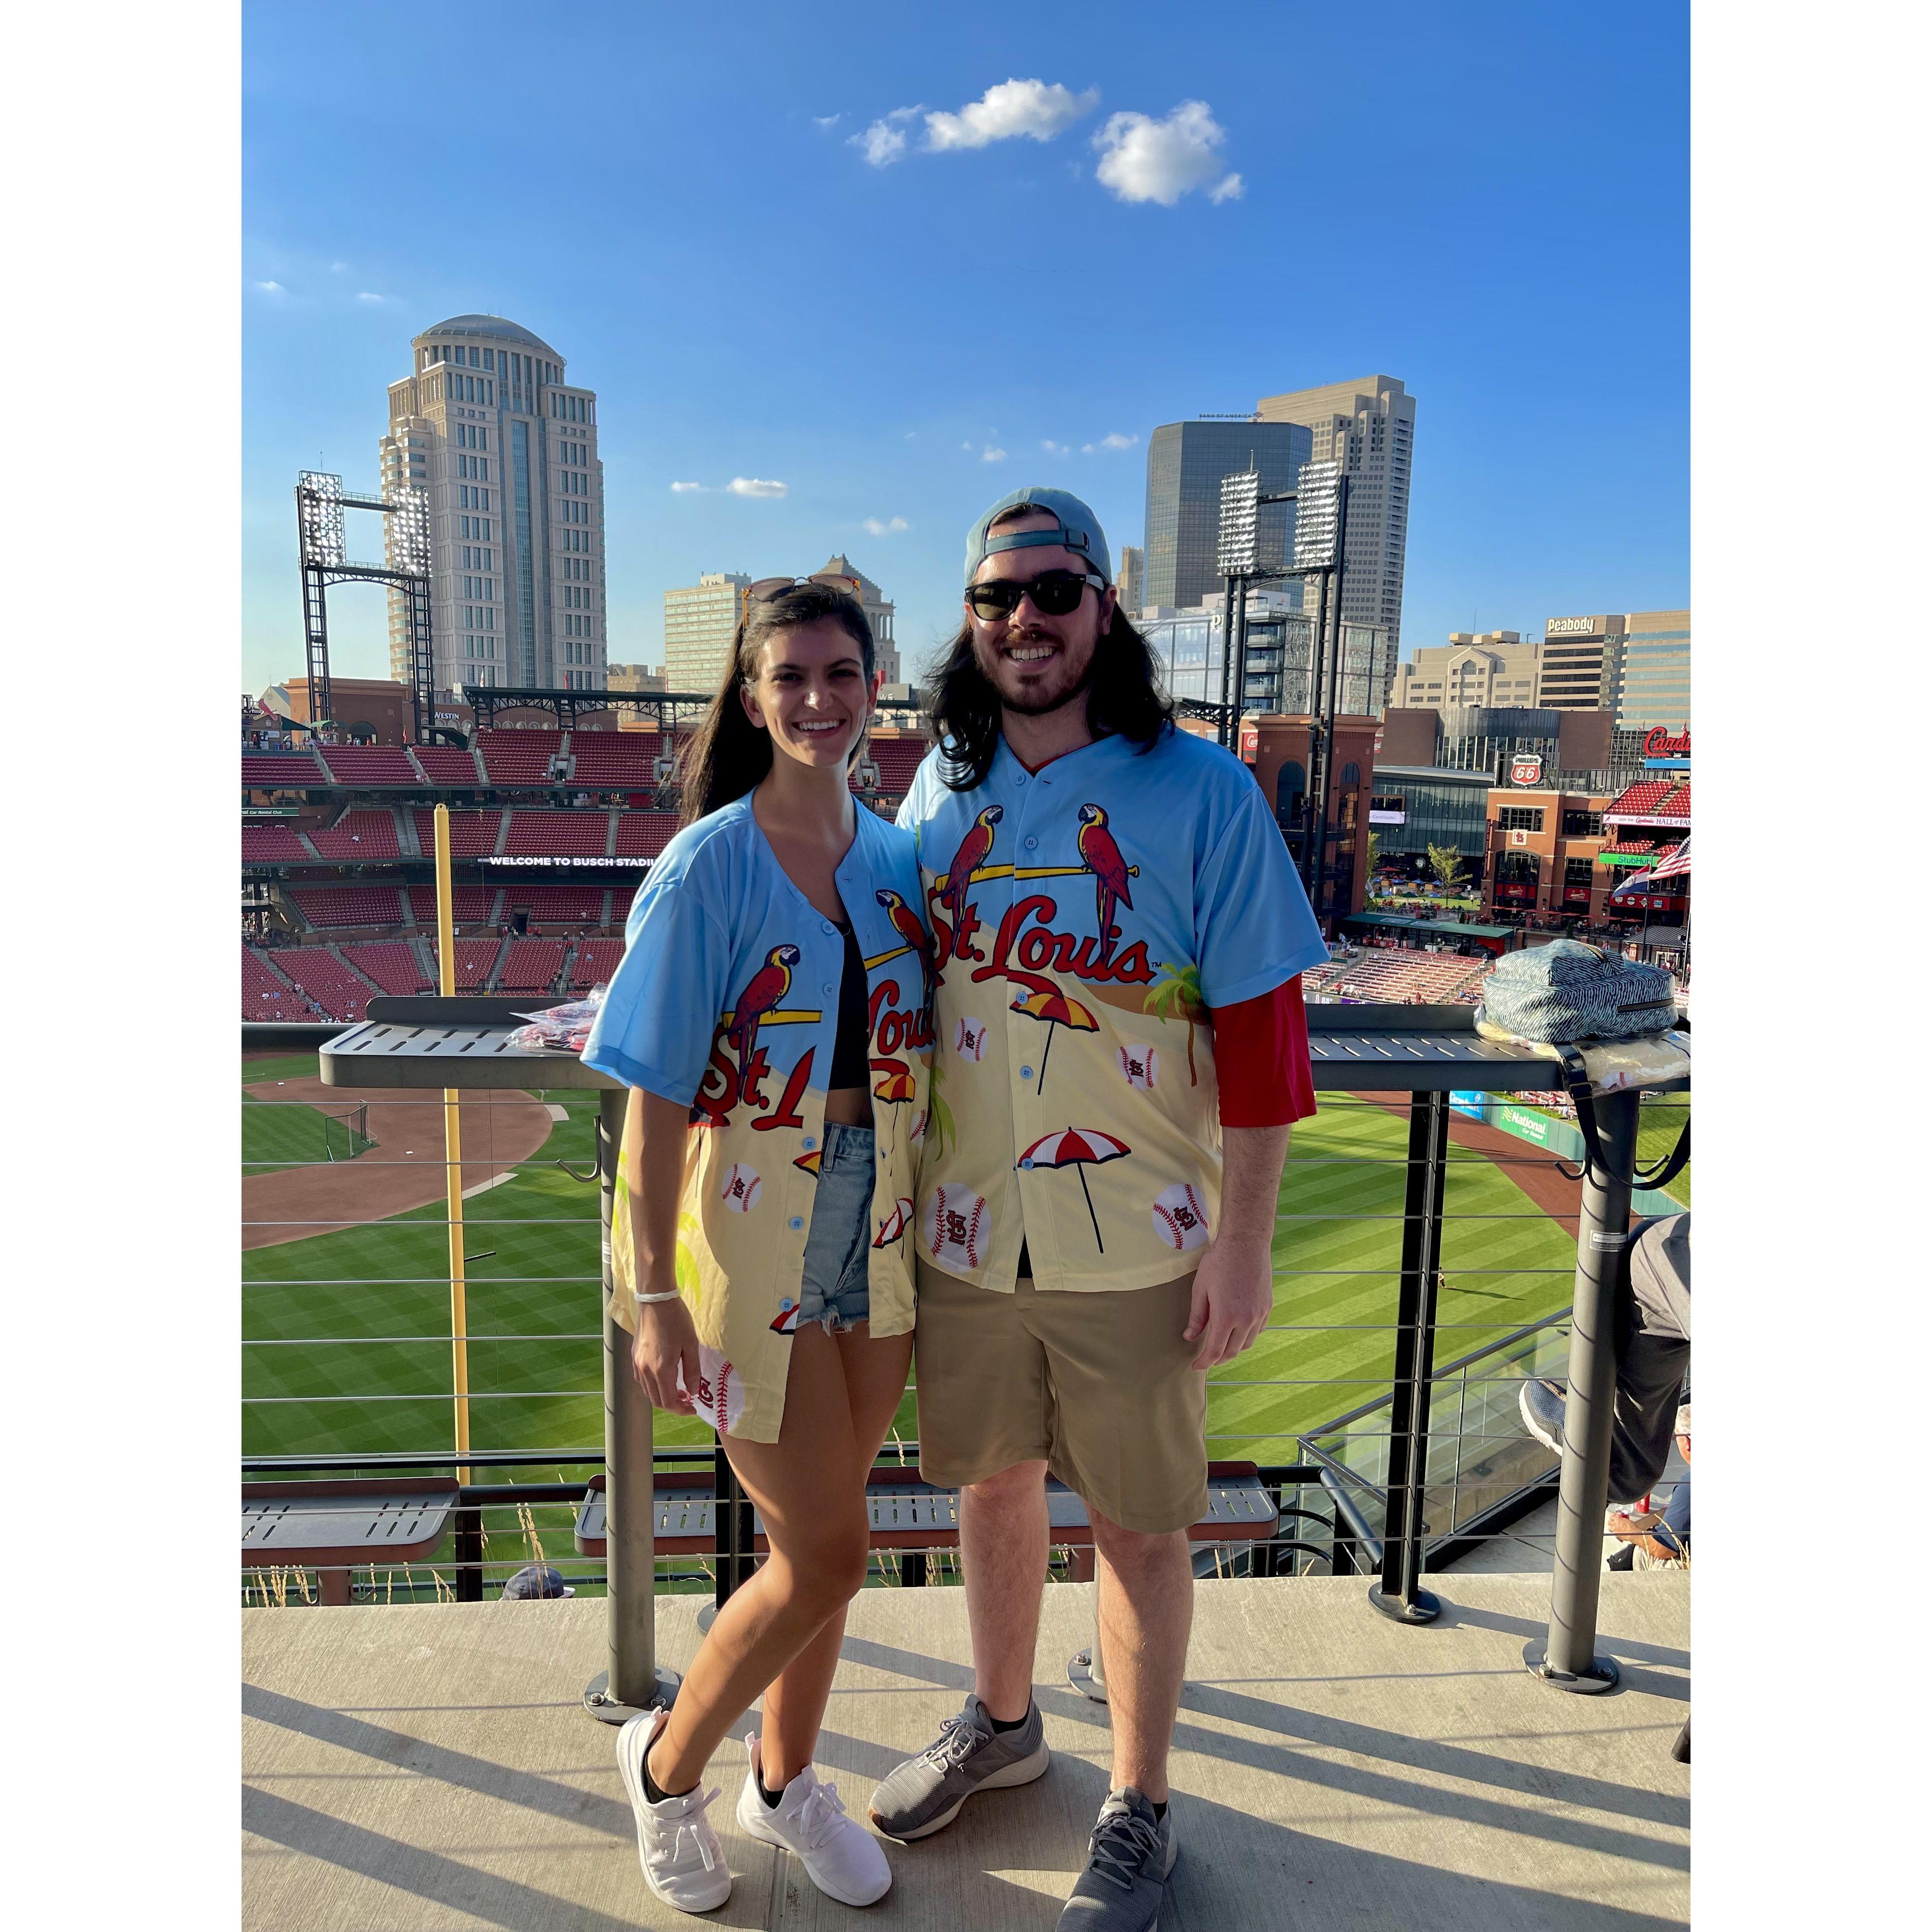 Our first cardinals game together